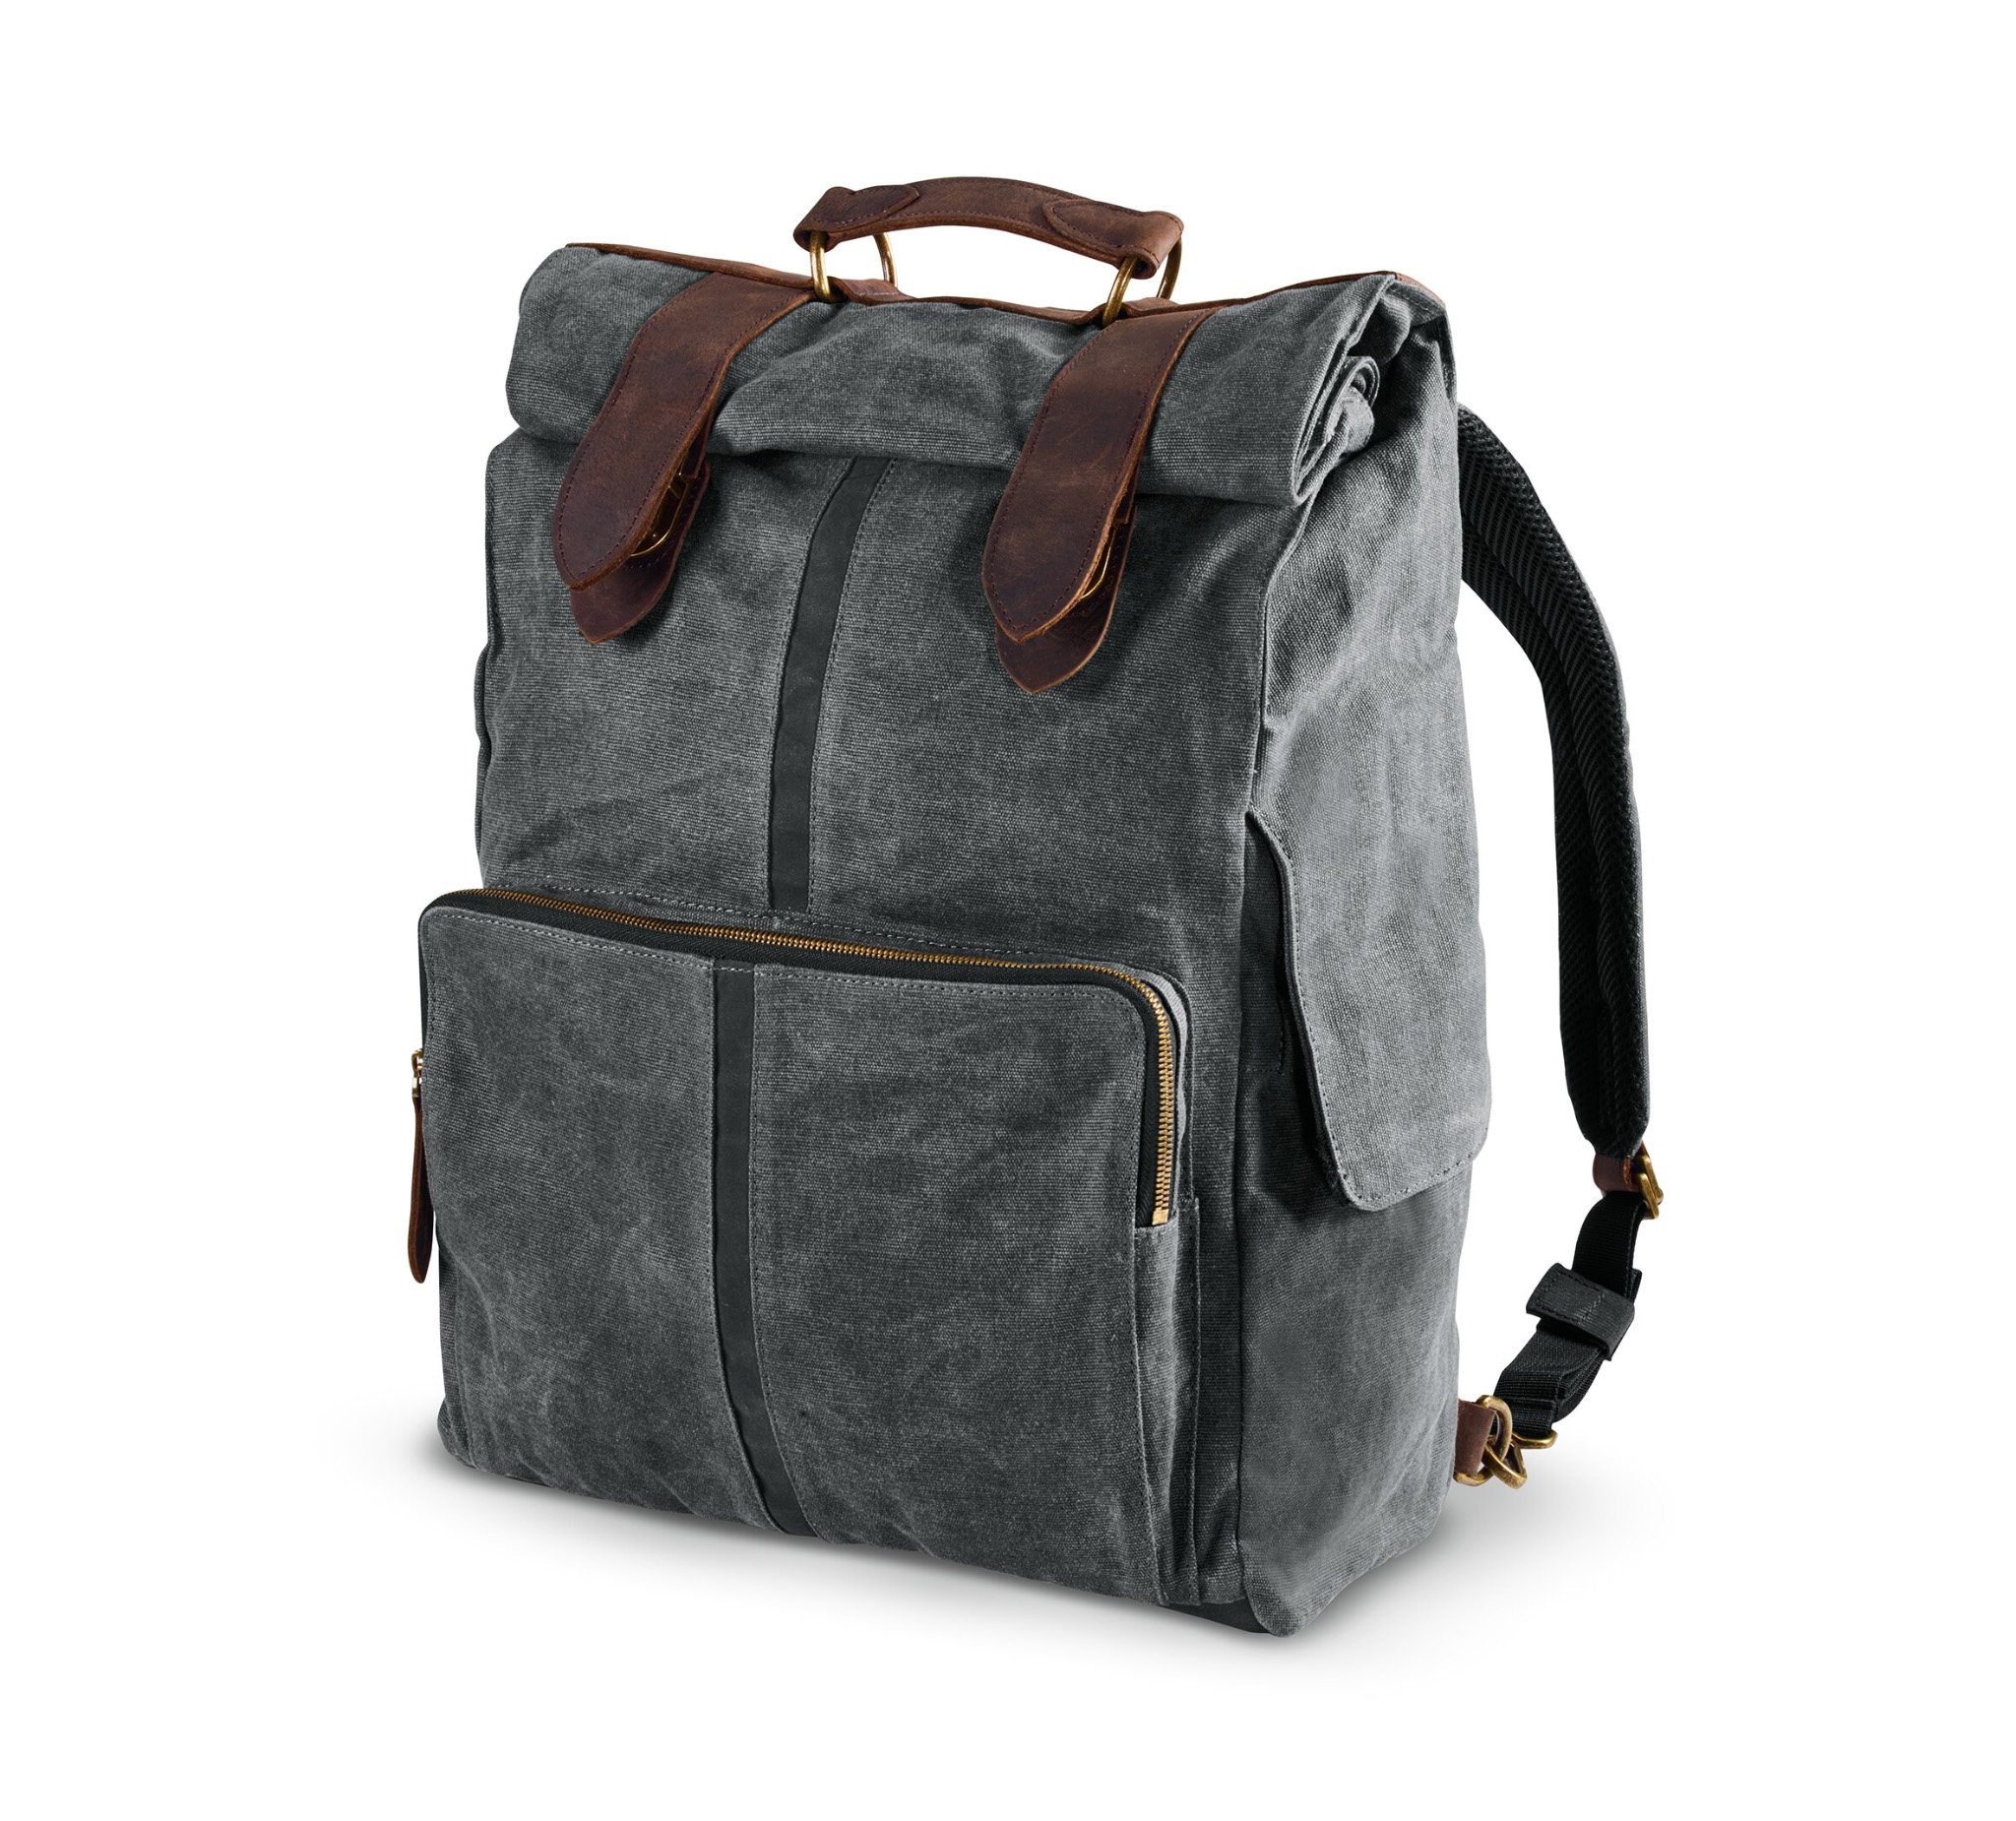 The Waxed Canvas Adventure Backpack